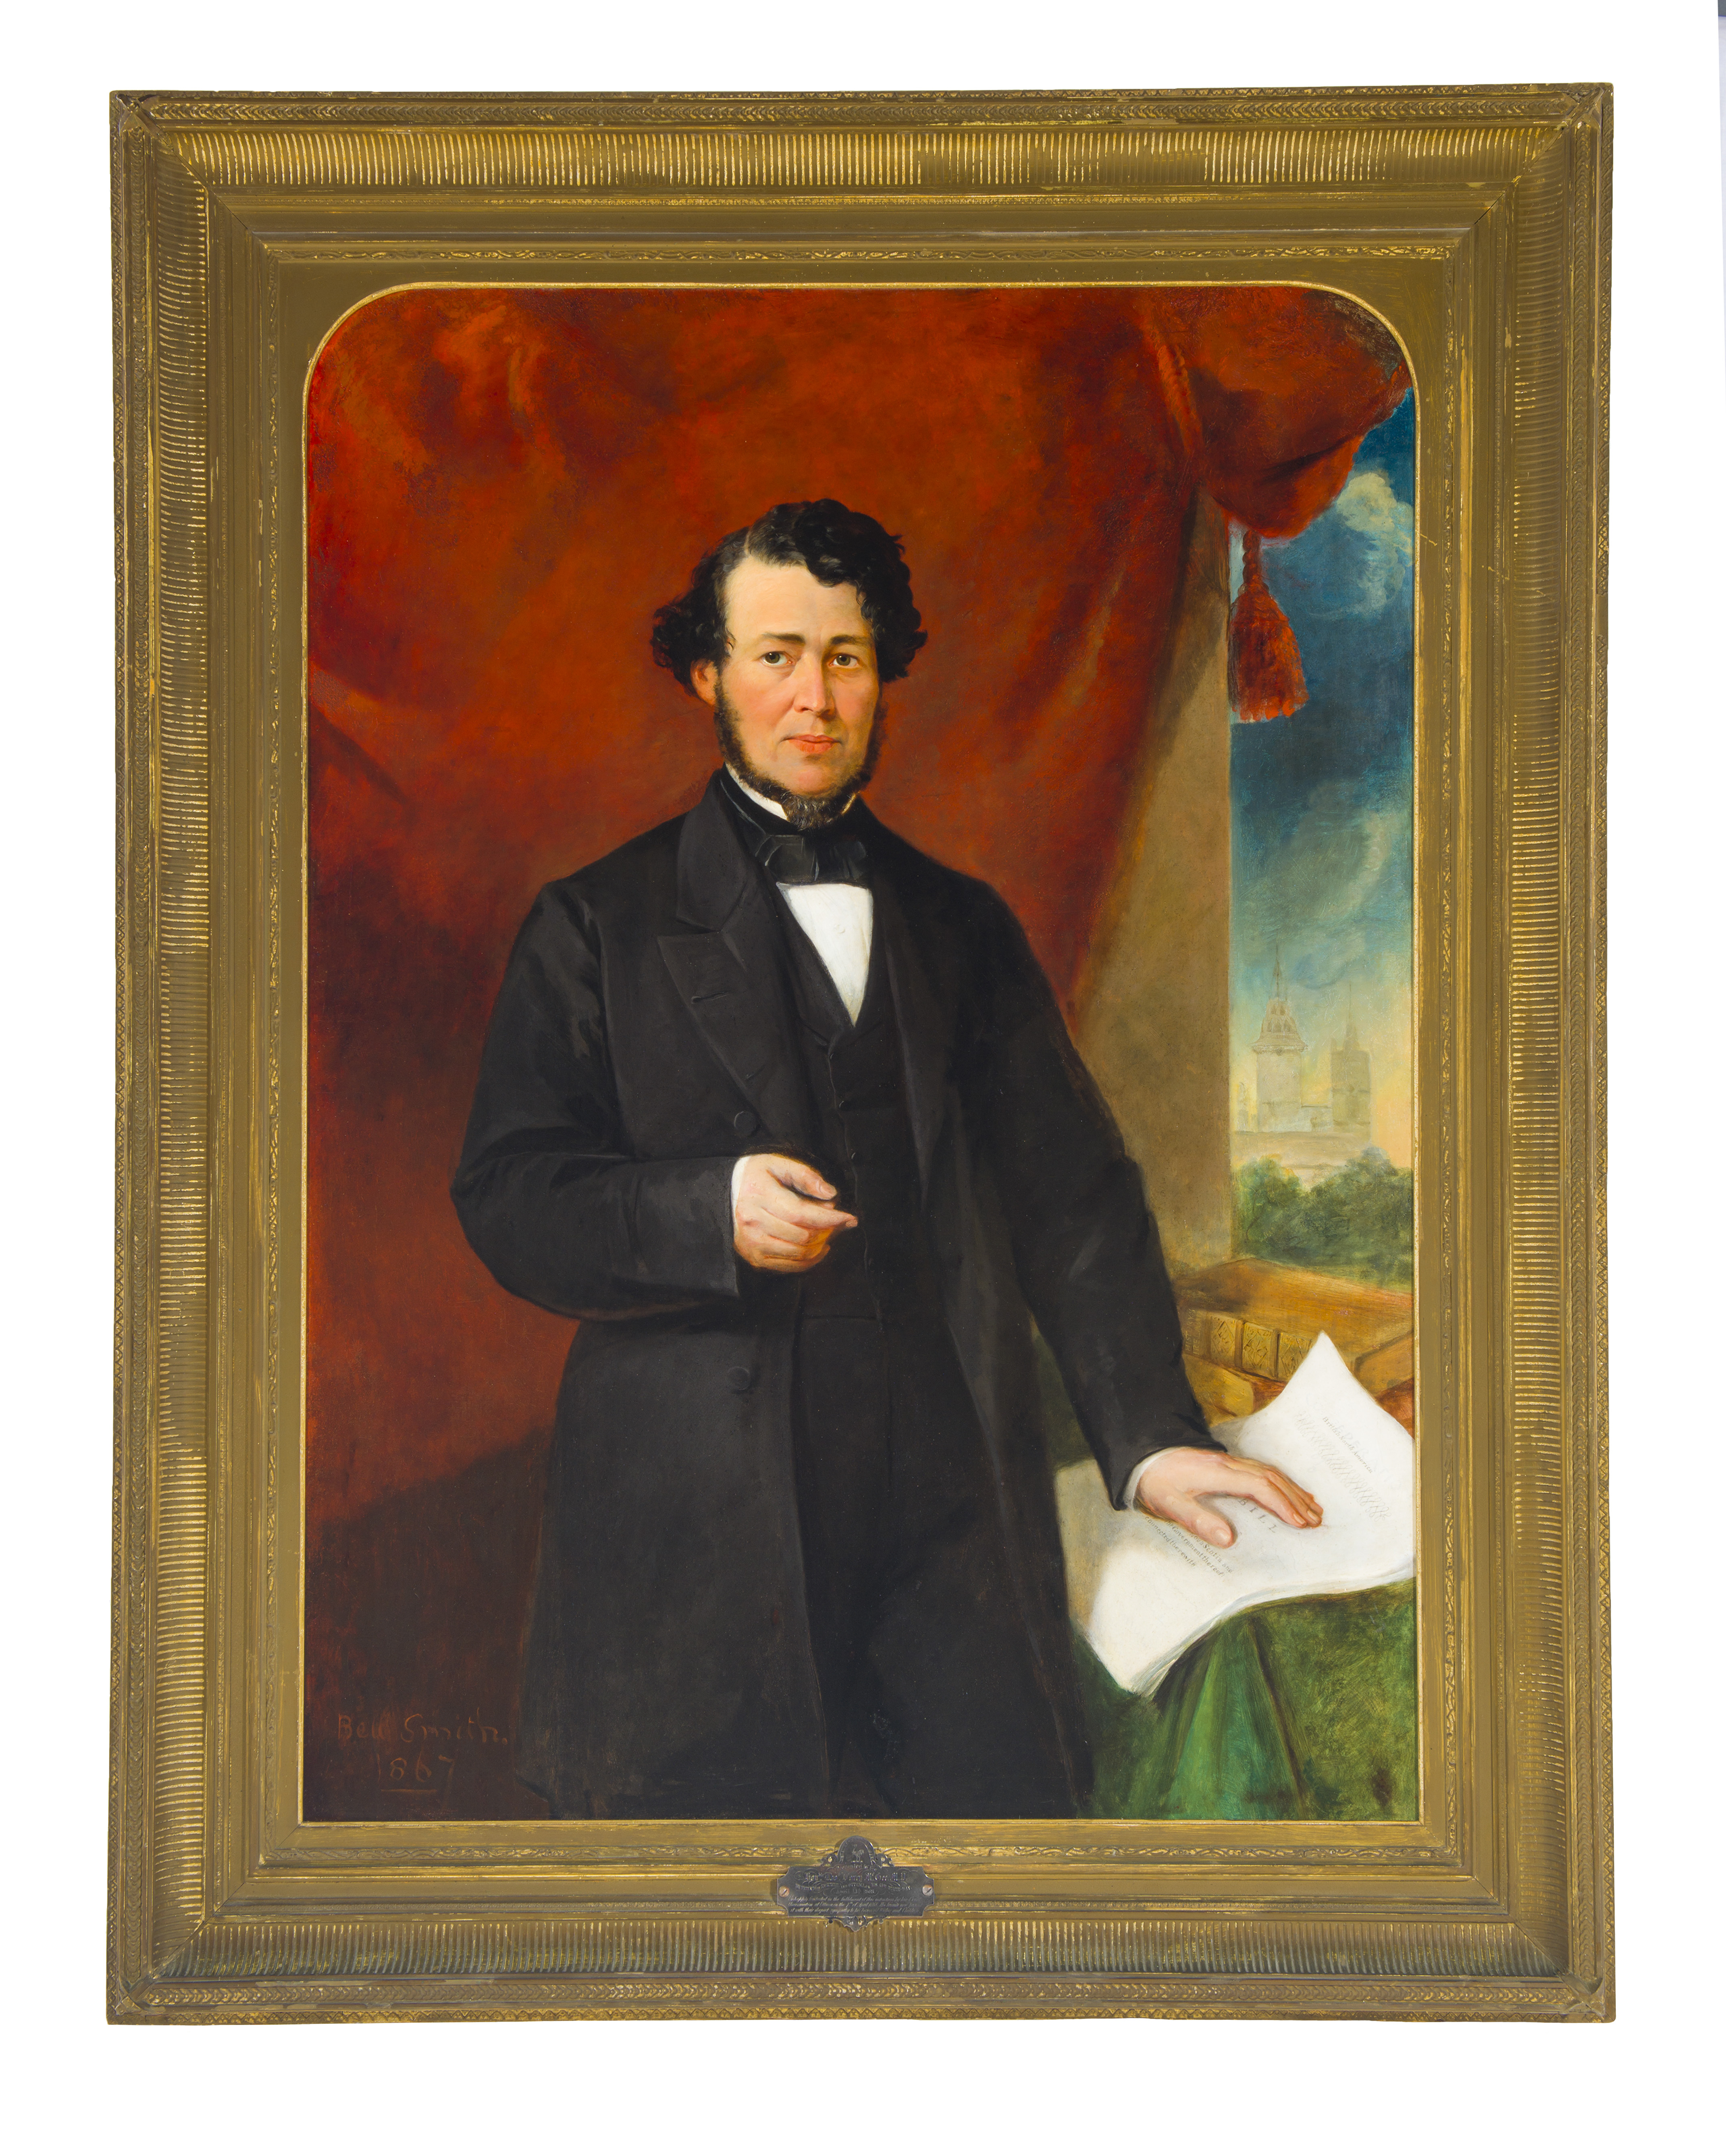 Painted portrait of a man with dark hair wearing a suit.